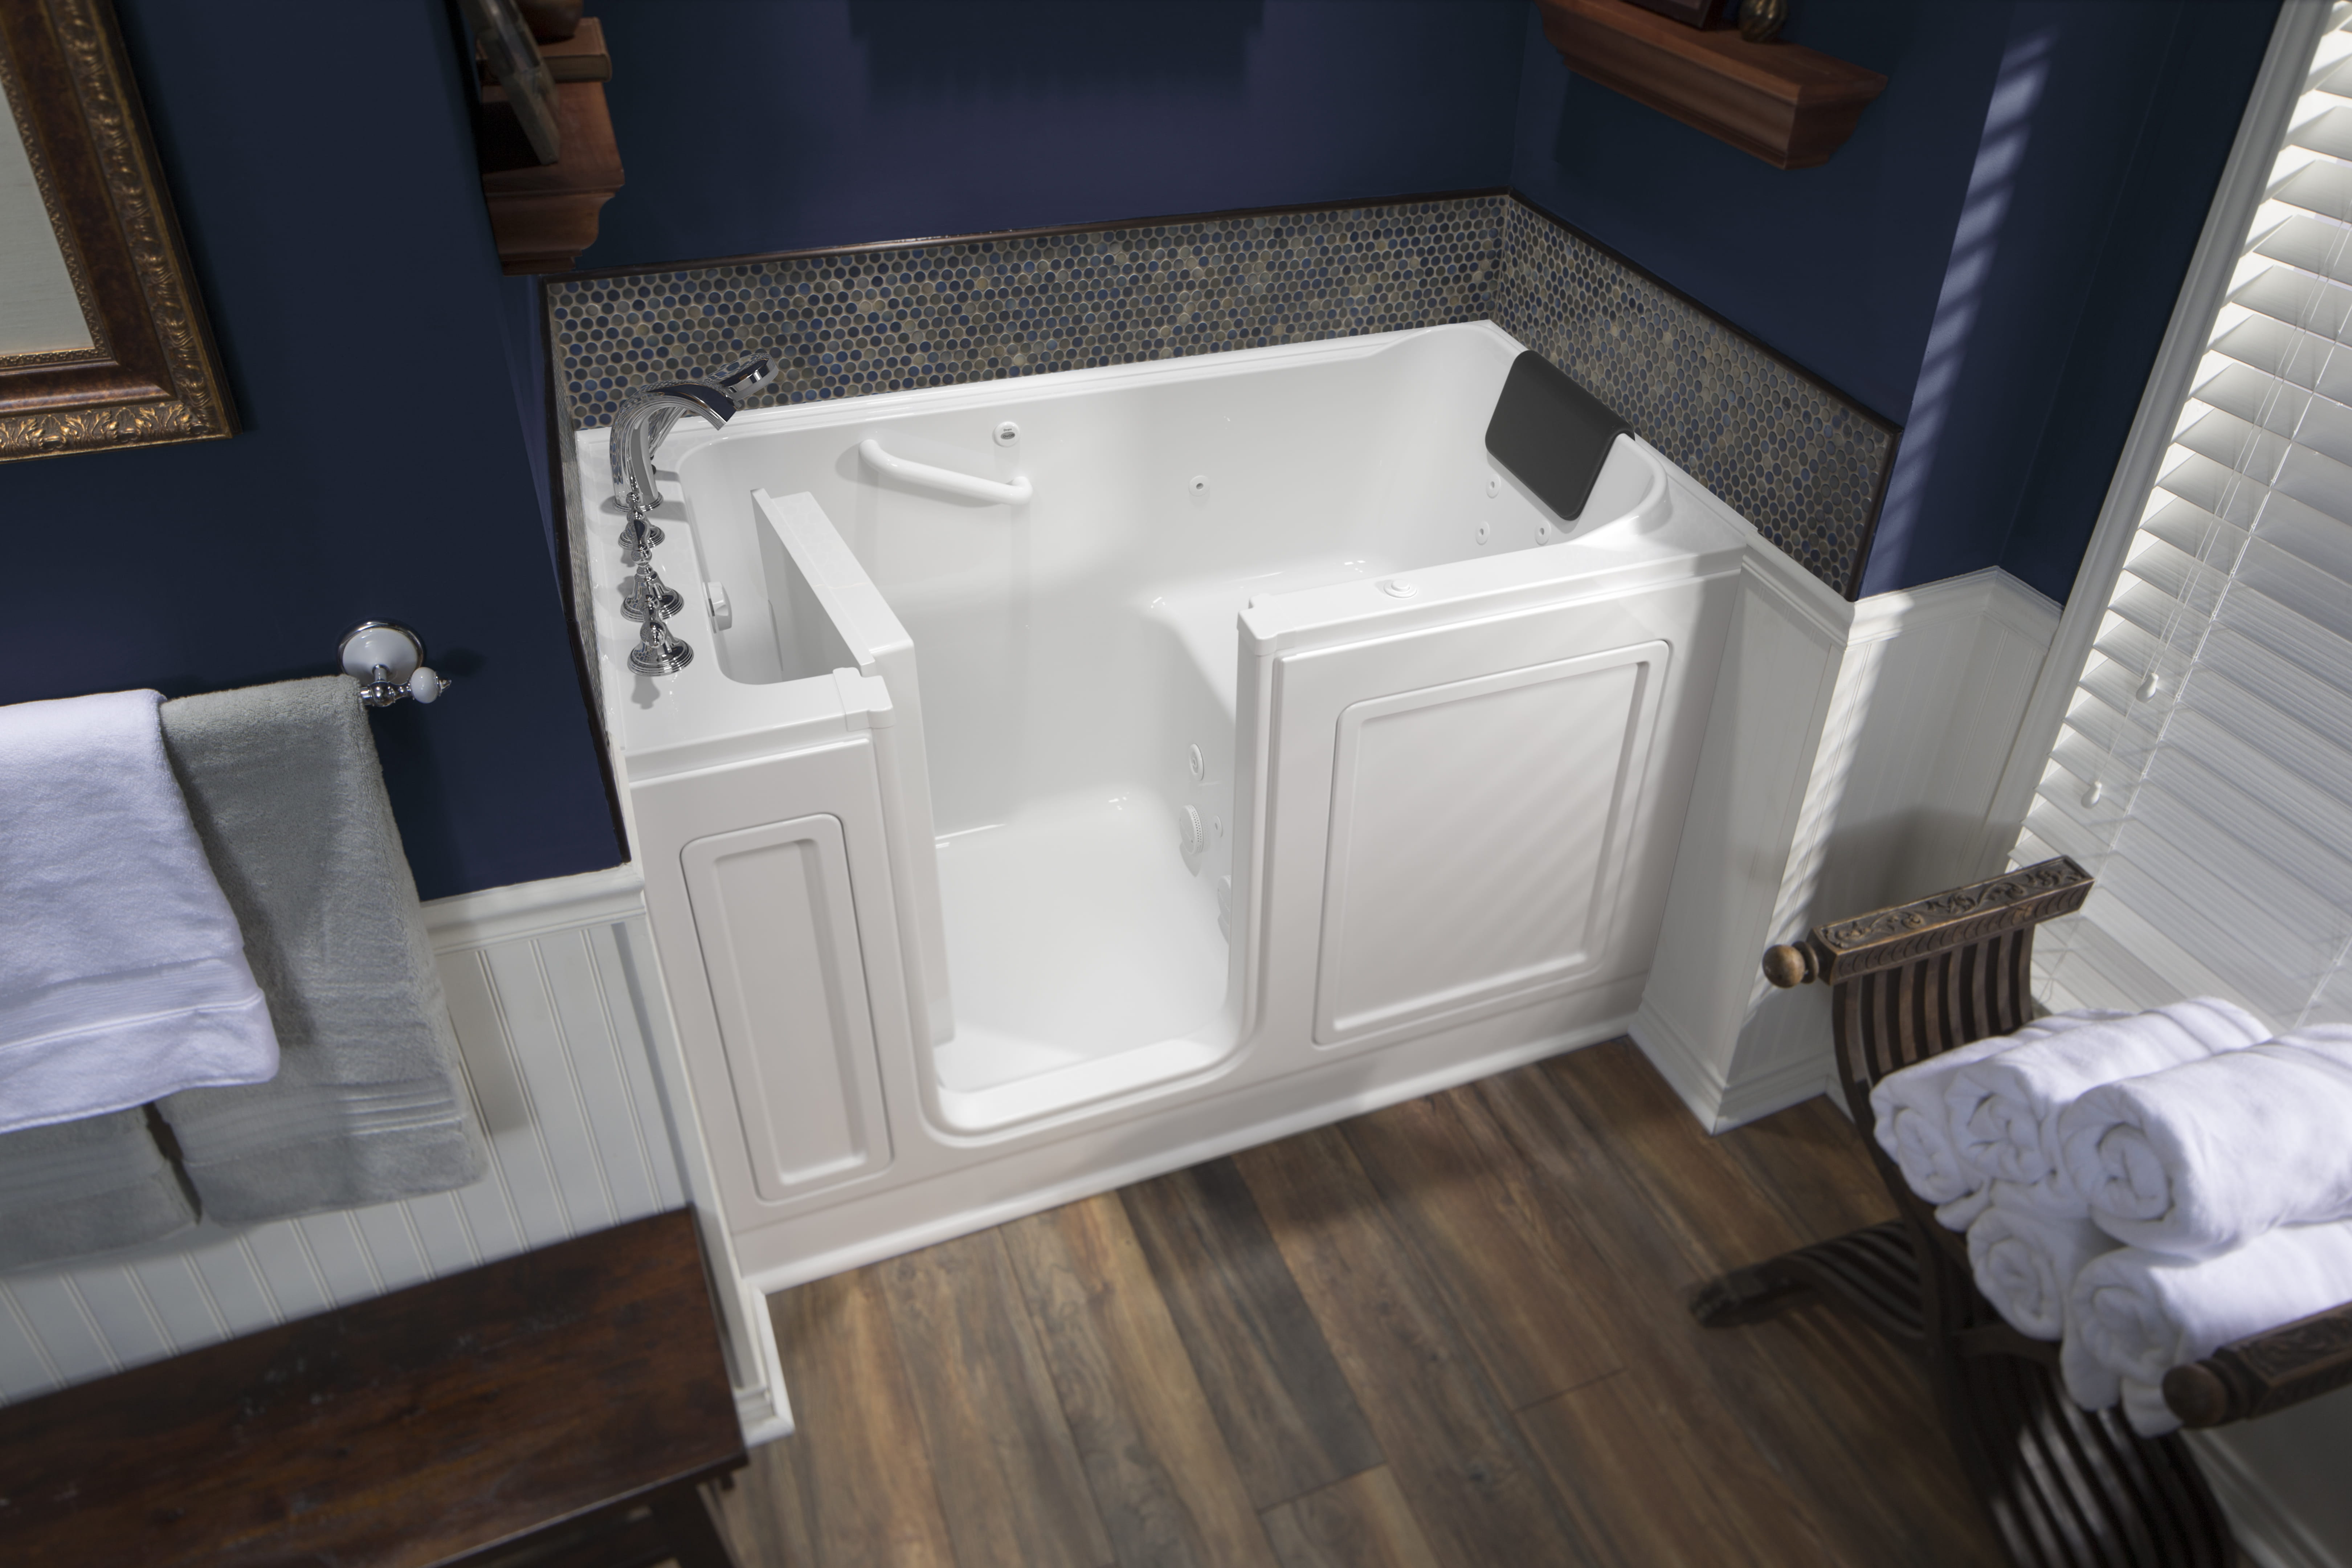 Acrylic Luxury Series 32 x 60 -Inch Walk-in Tub With Whirlpool System - Left-Hand Drain With Faucet